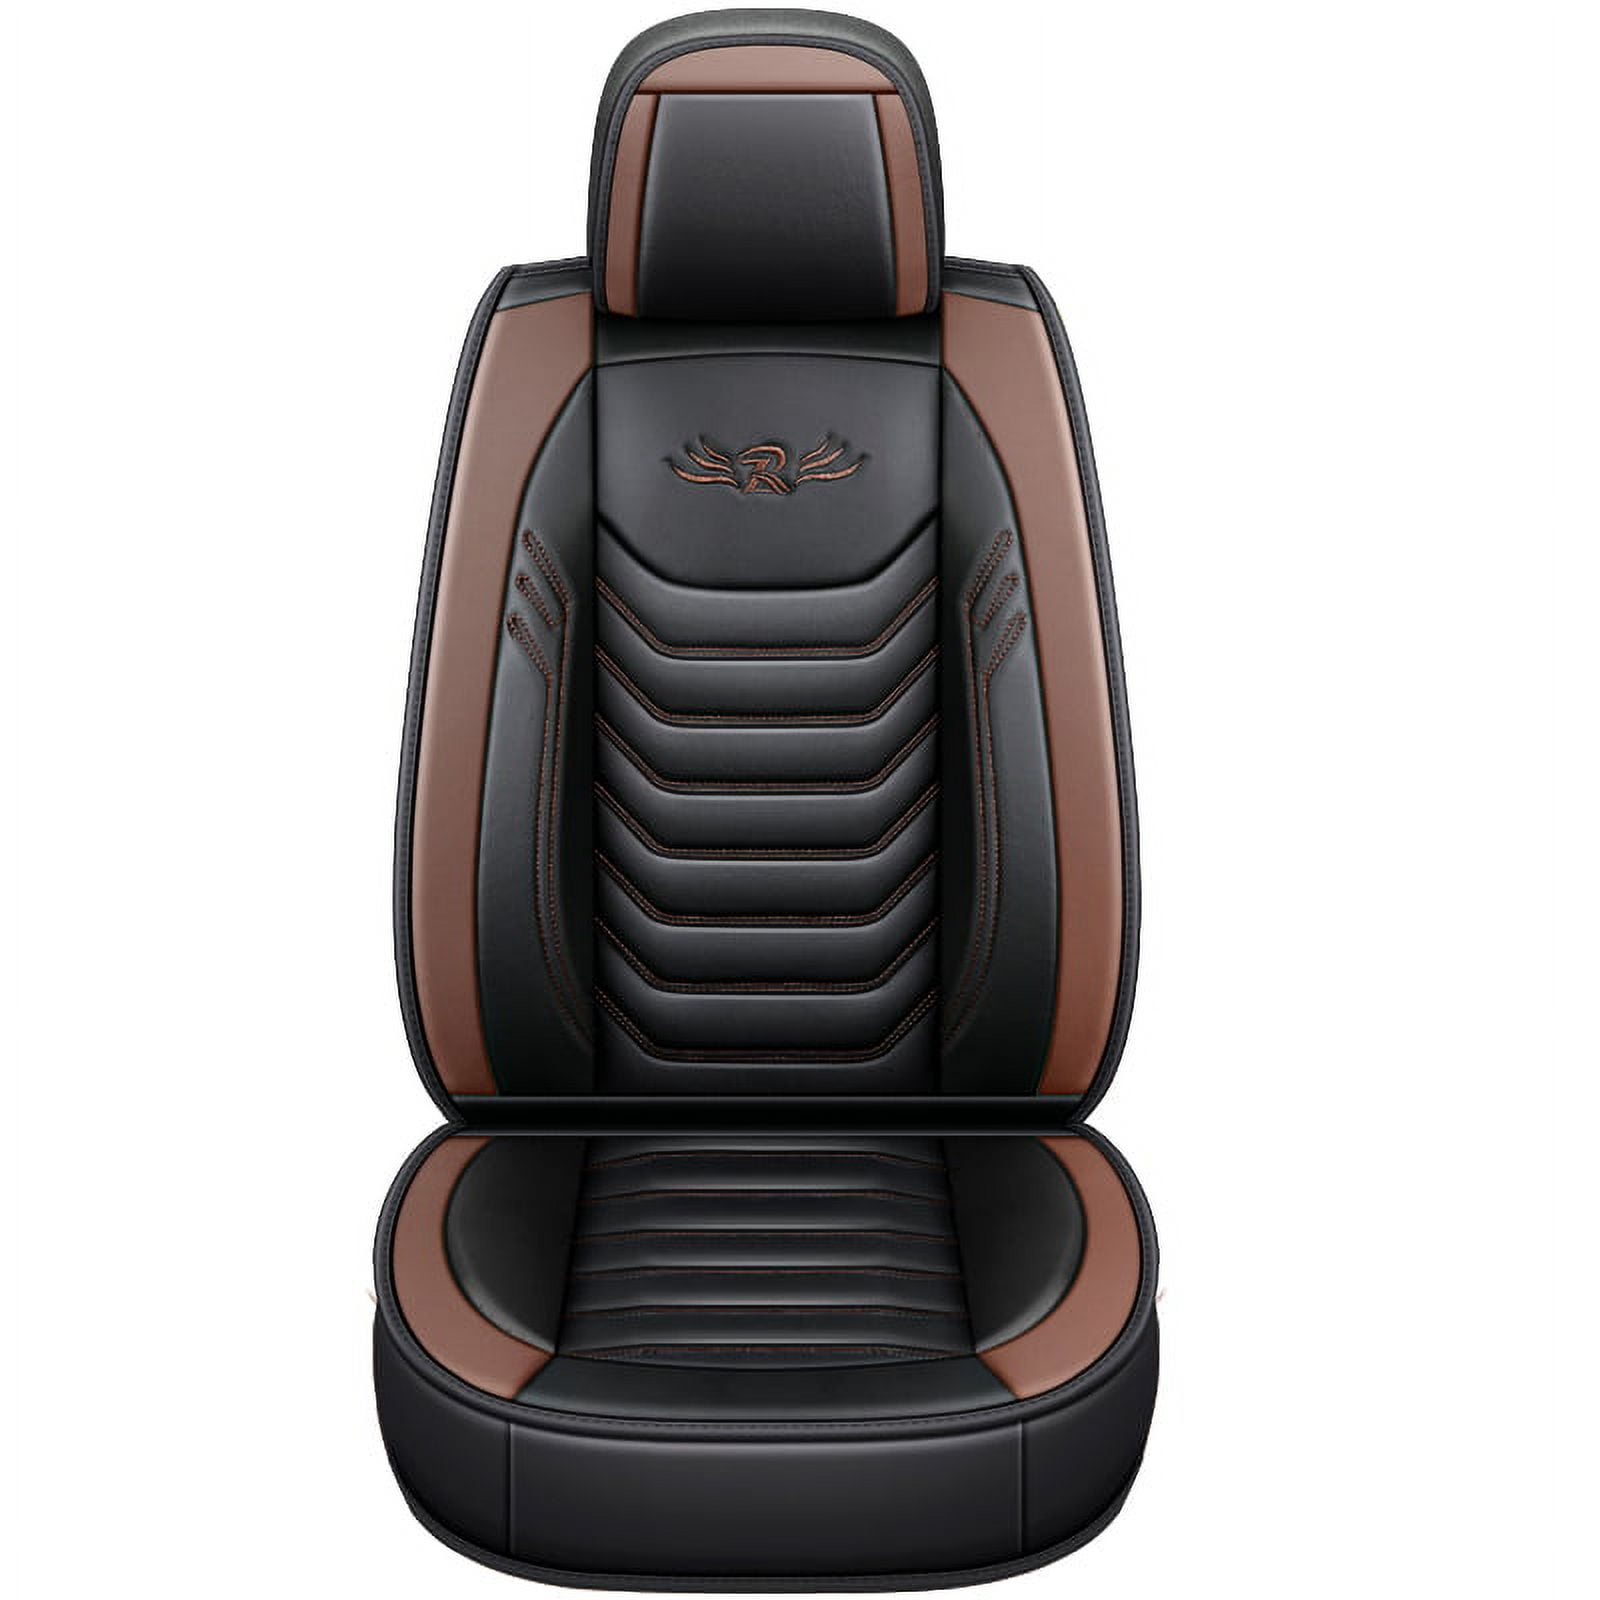 Executive Premium Car Seat Covers with PU Leather for Front & Rear